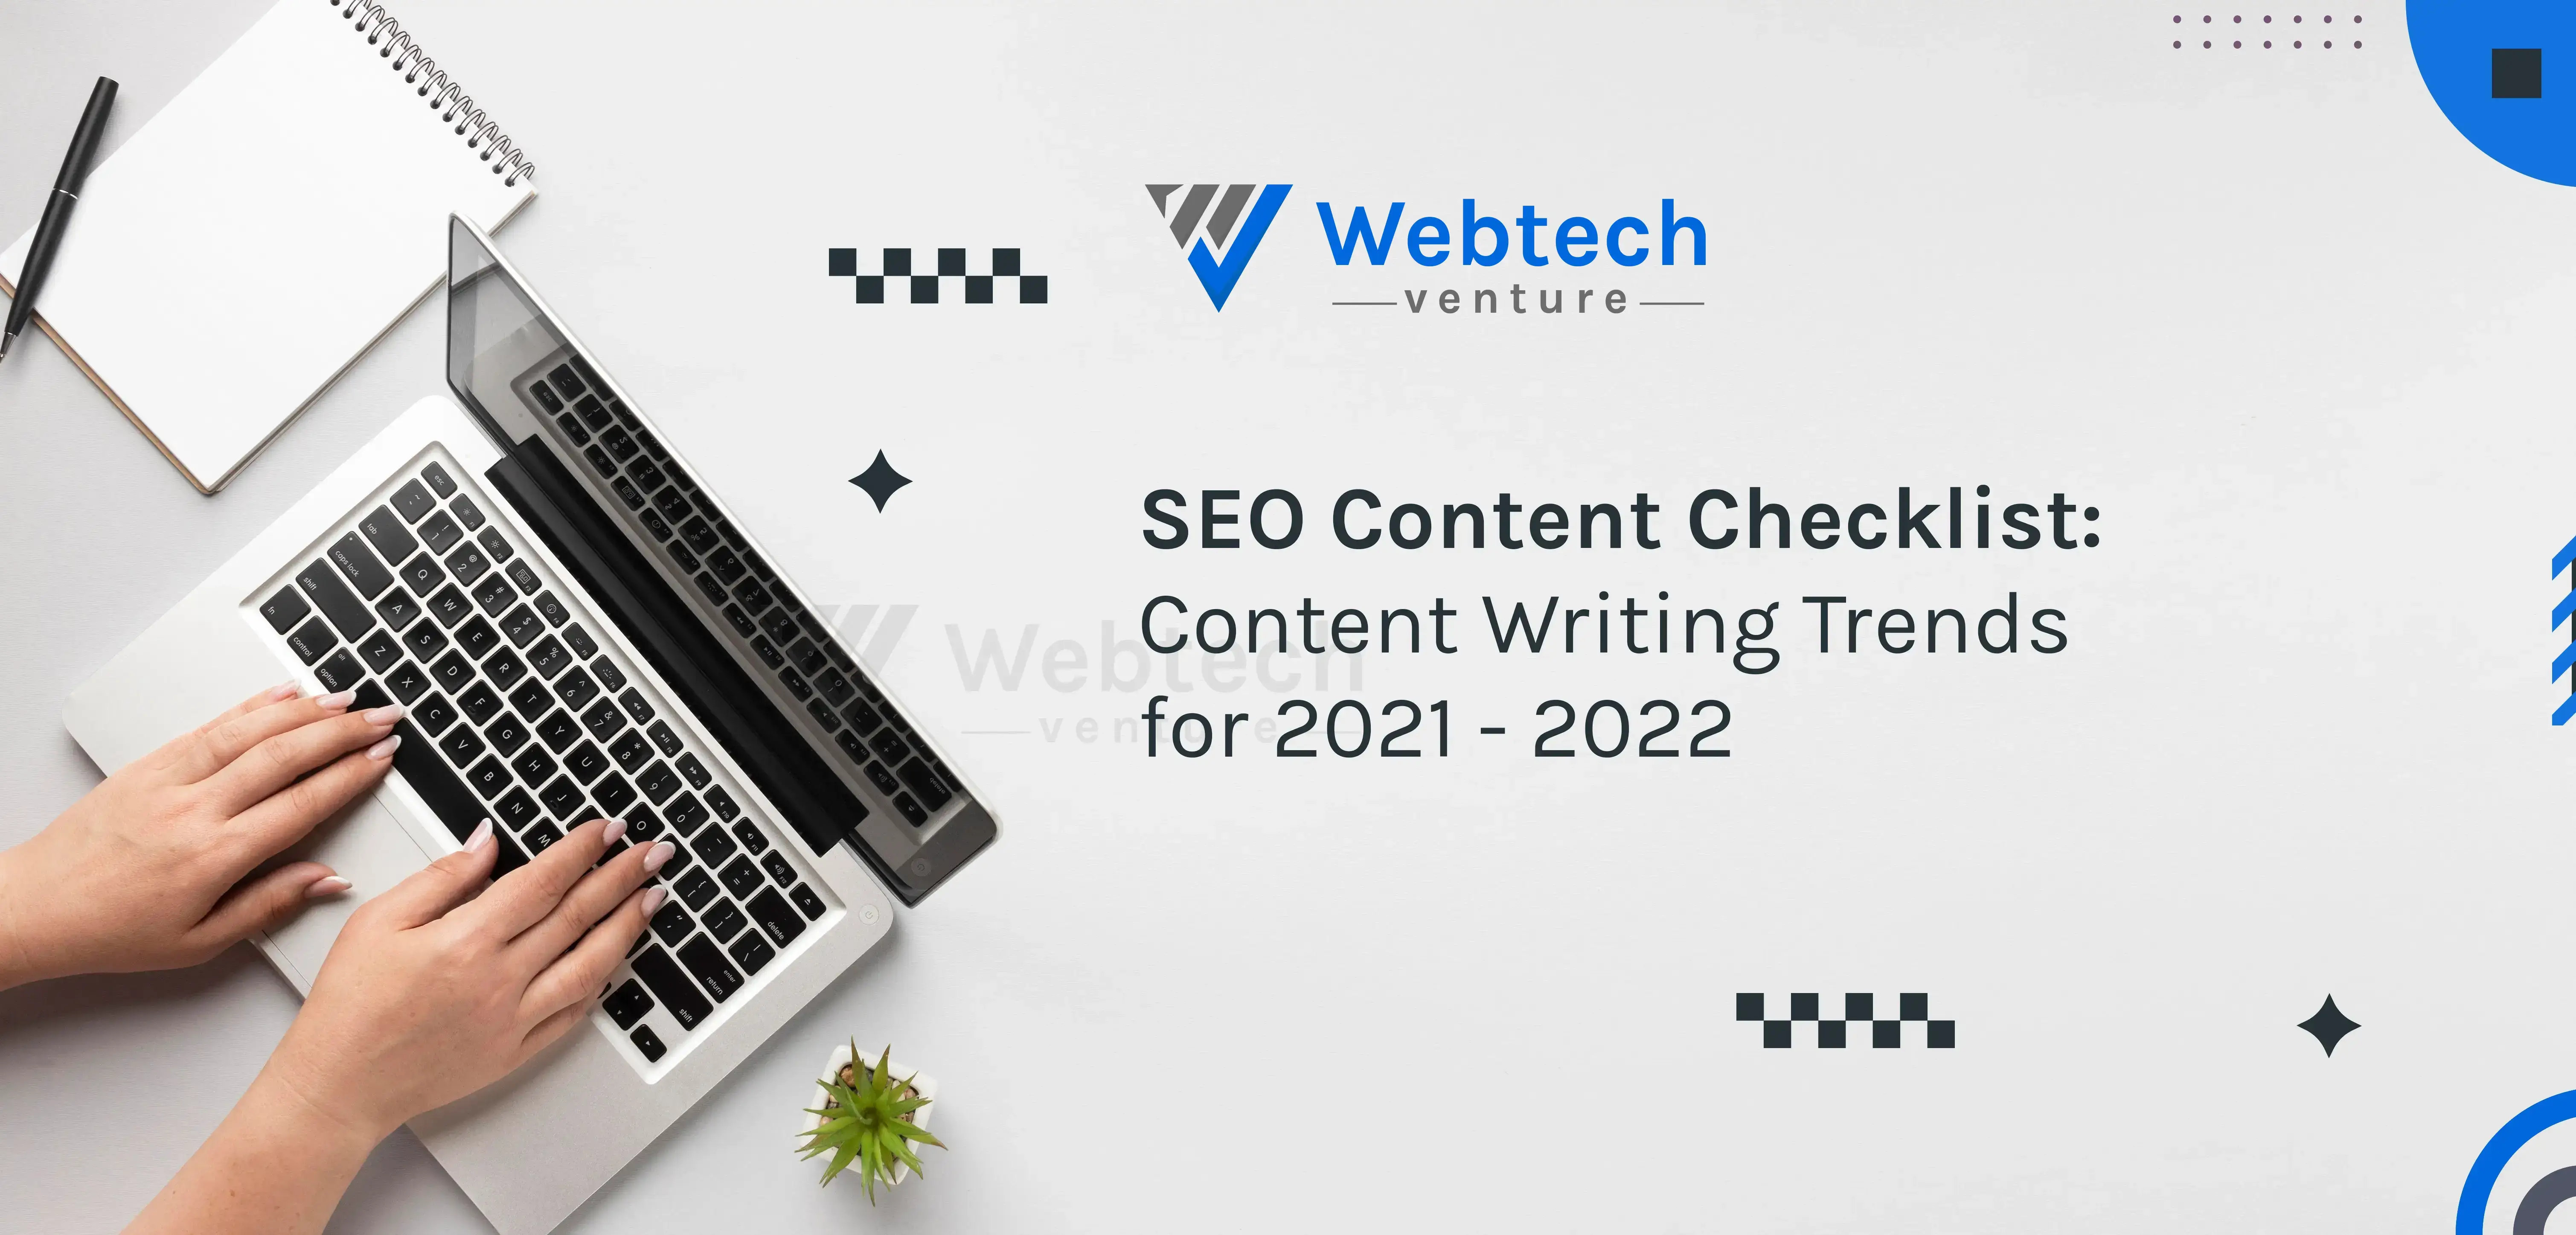 What Are the Top Content Writing Trends Noticed in 2021 for Effective SEO?